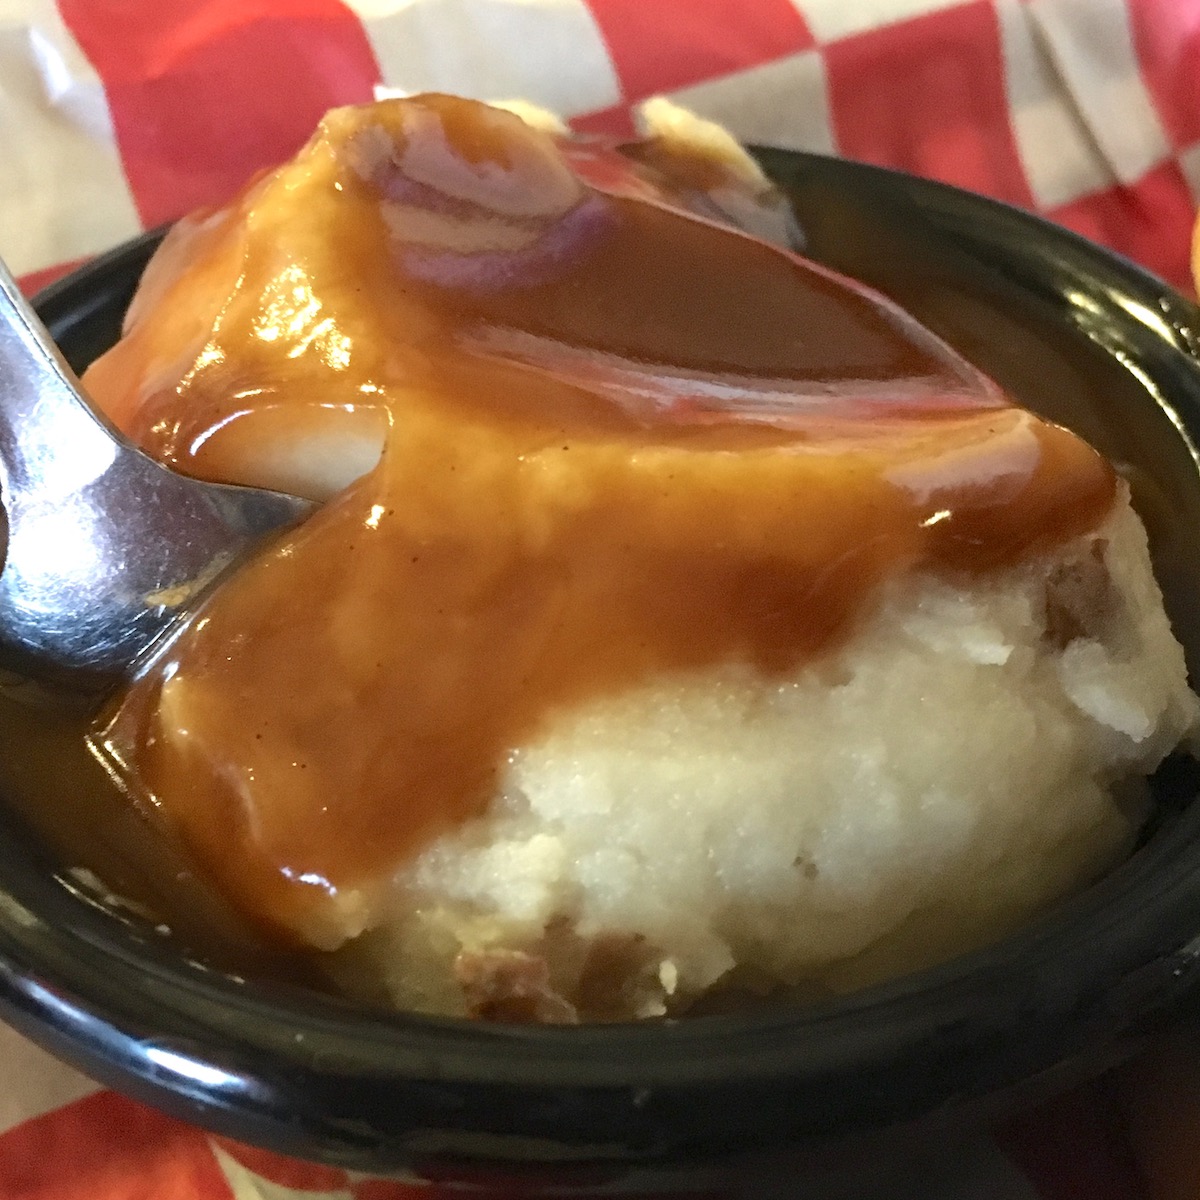 Mashed Potatoes with Gravy from Shiver's BBQ in Homestead, Florida